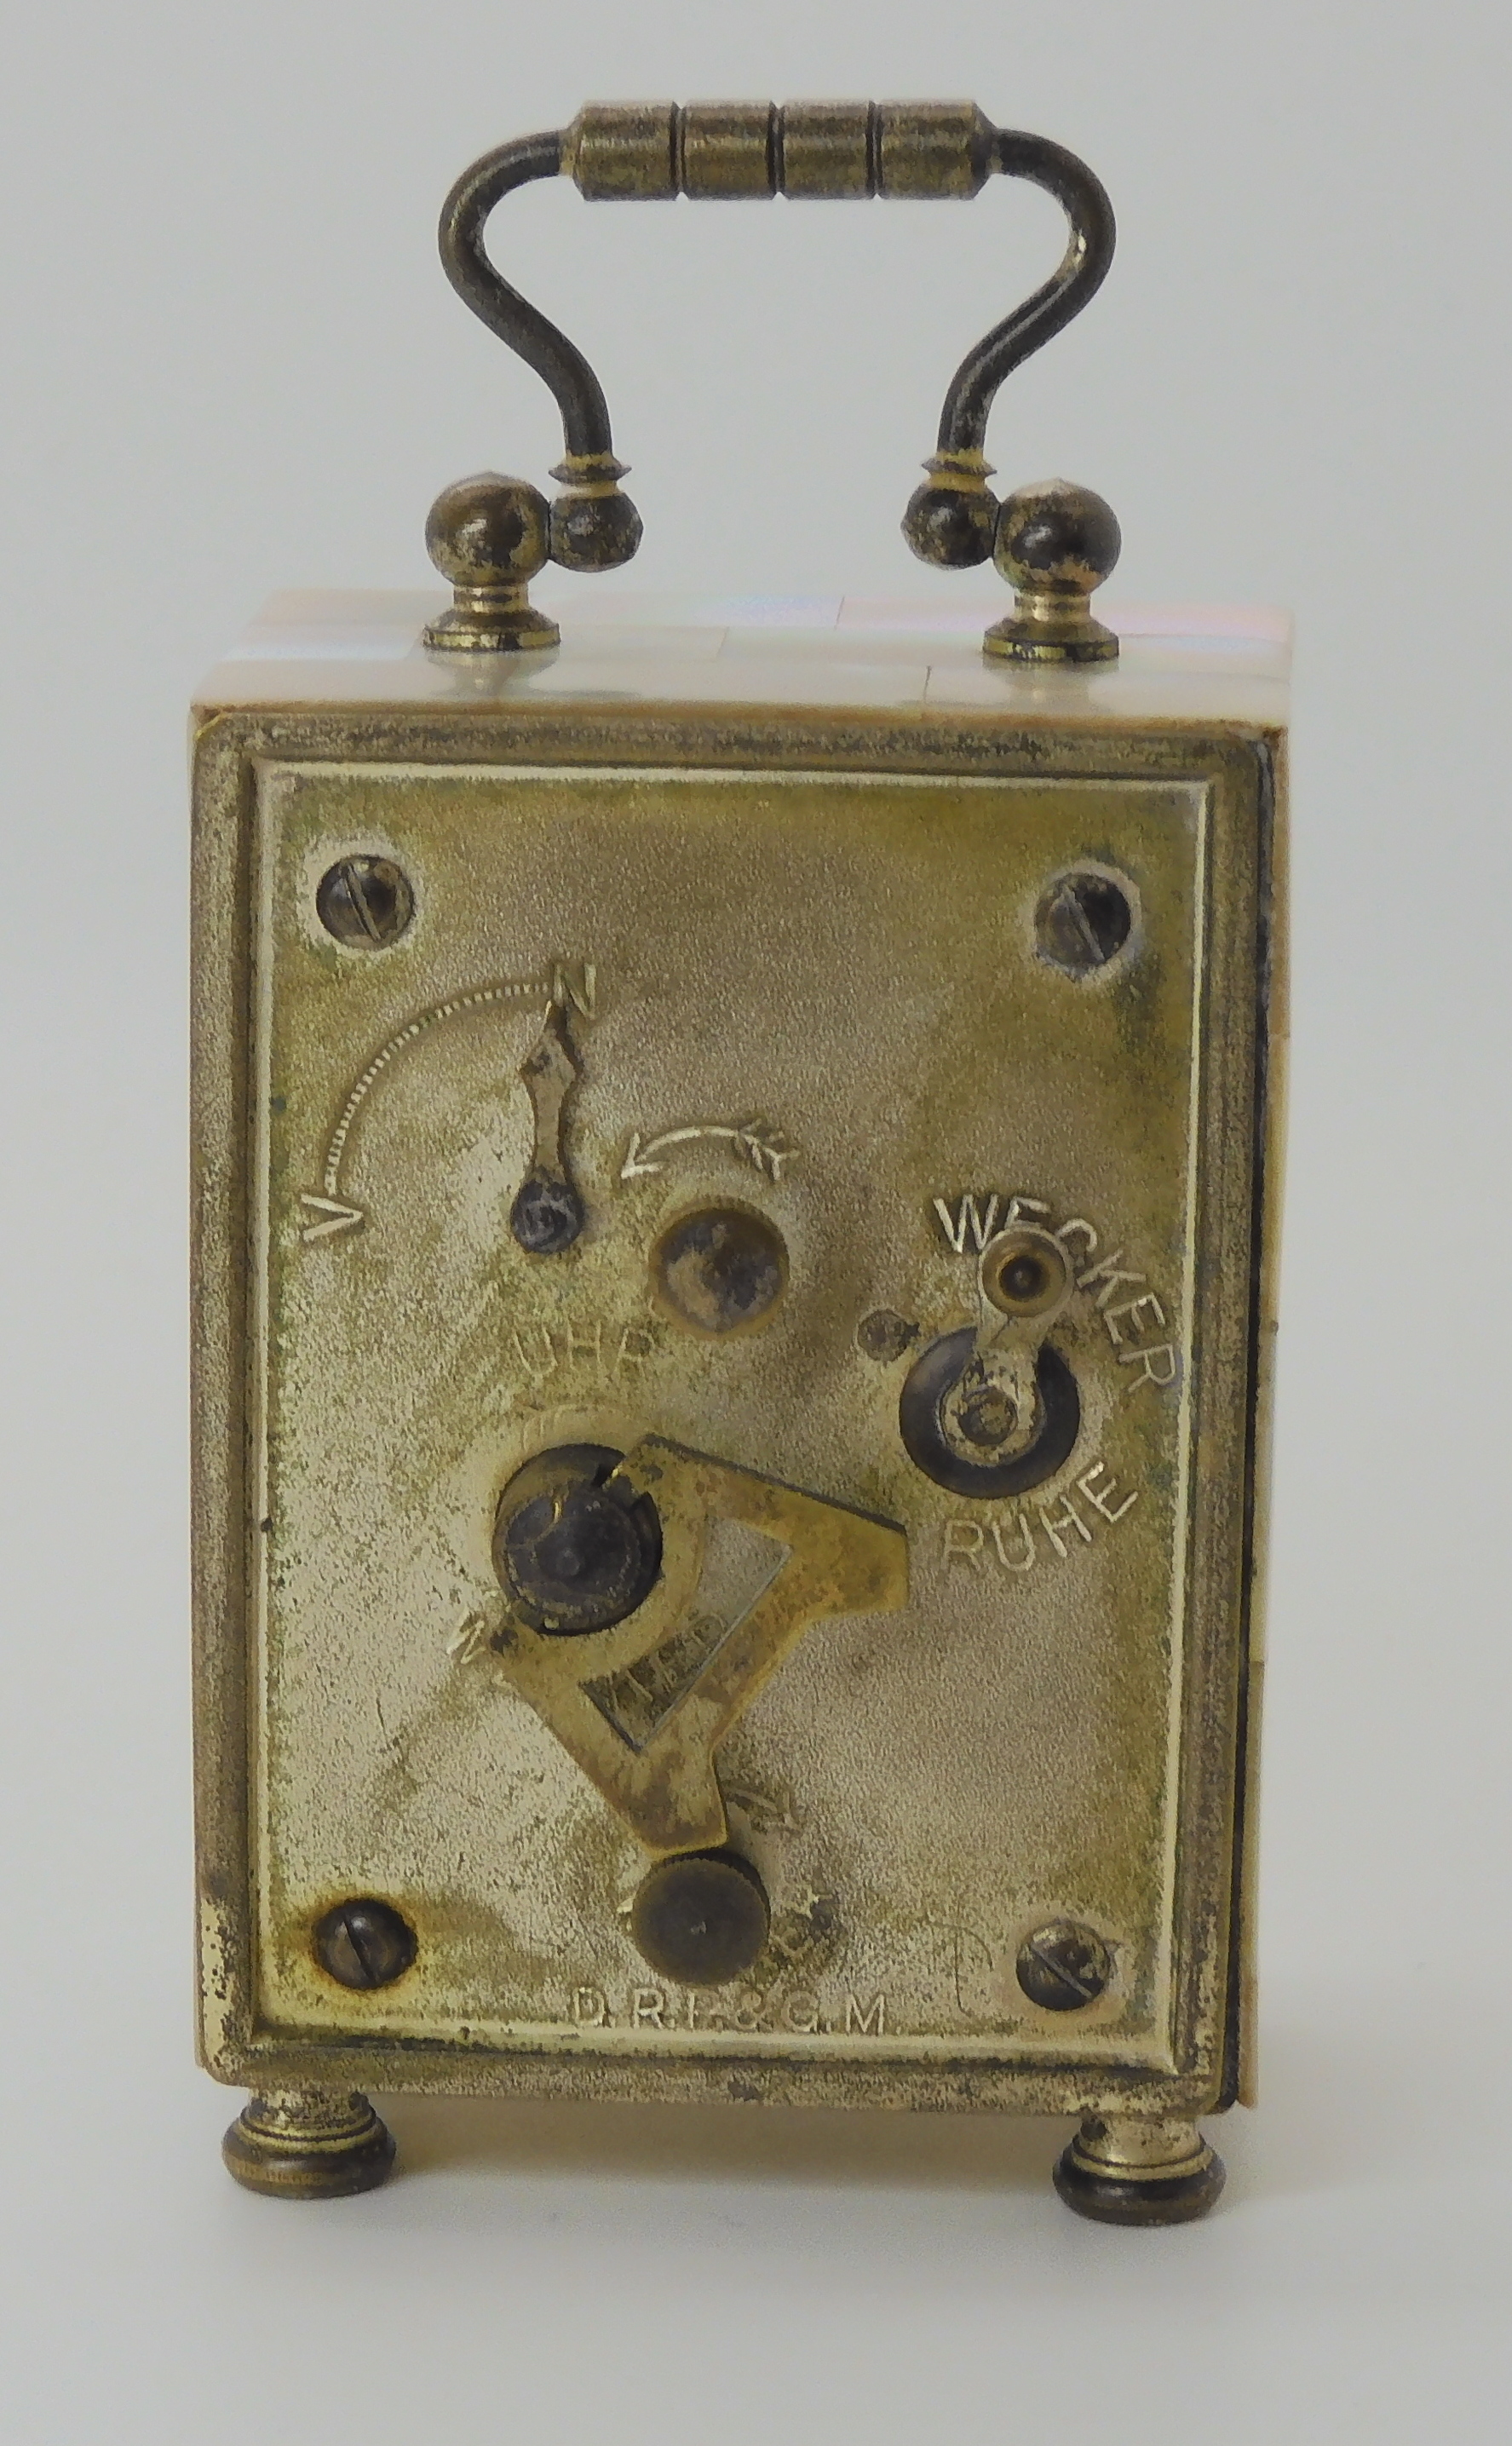 A MOTHER OF PEARL WECKER ALARM CARRIAGE CLOCK stamped D R P & G M, with a regular dial and an - Bild 6 aus 6